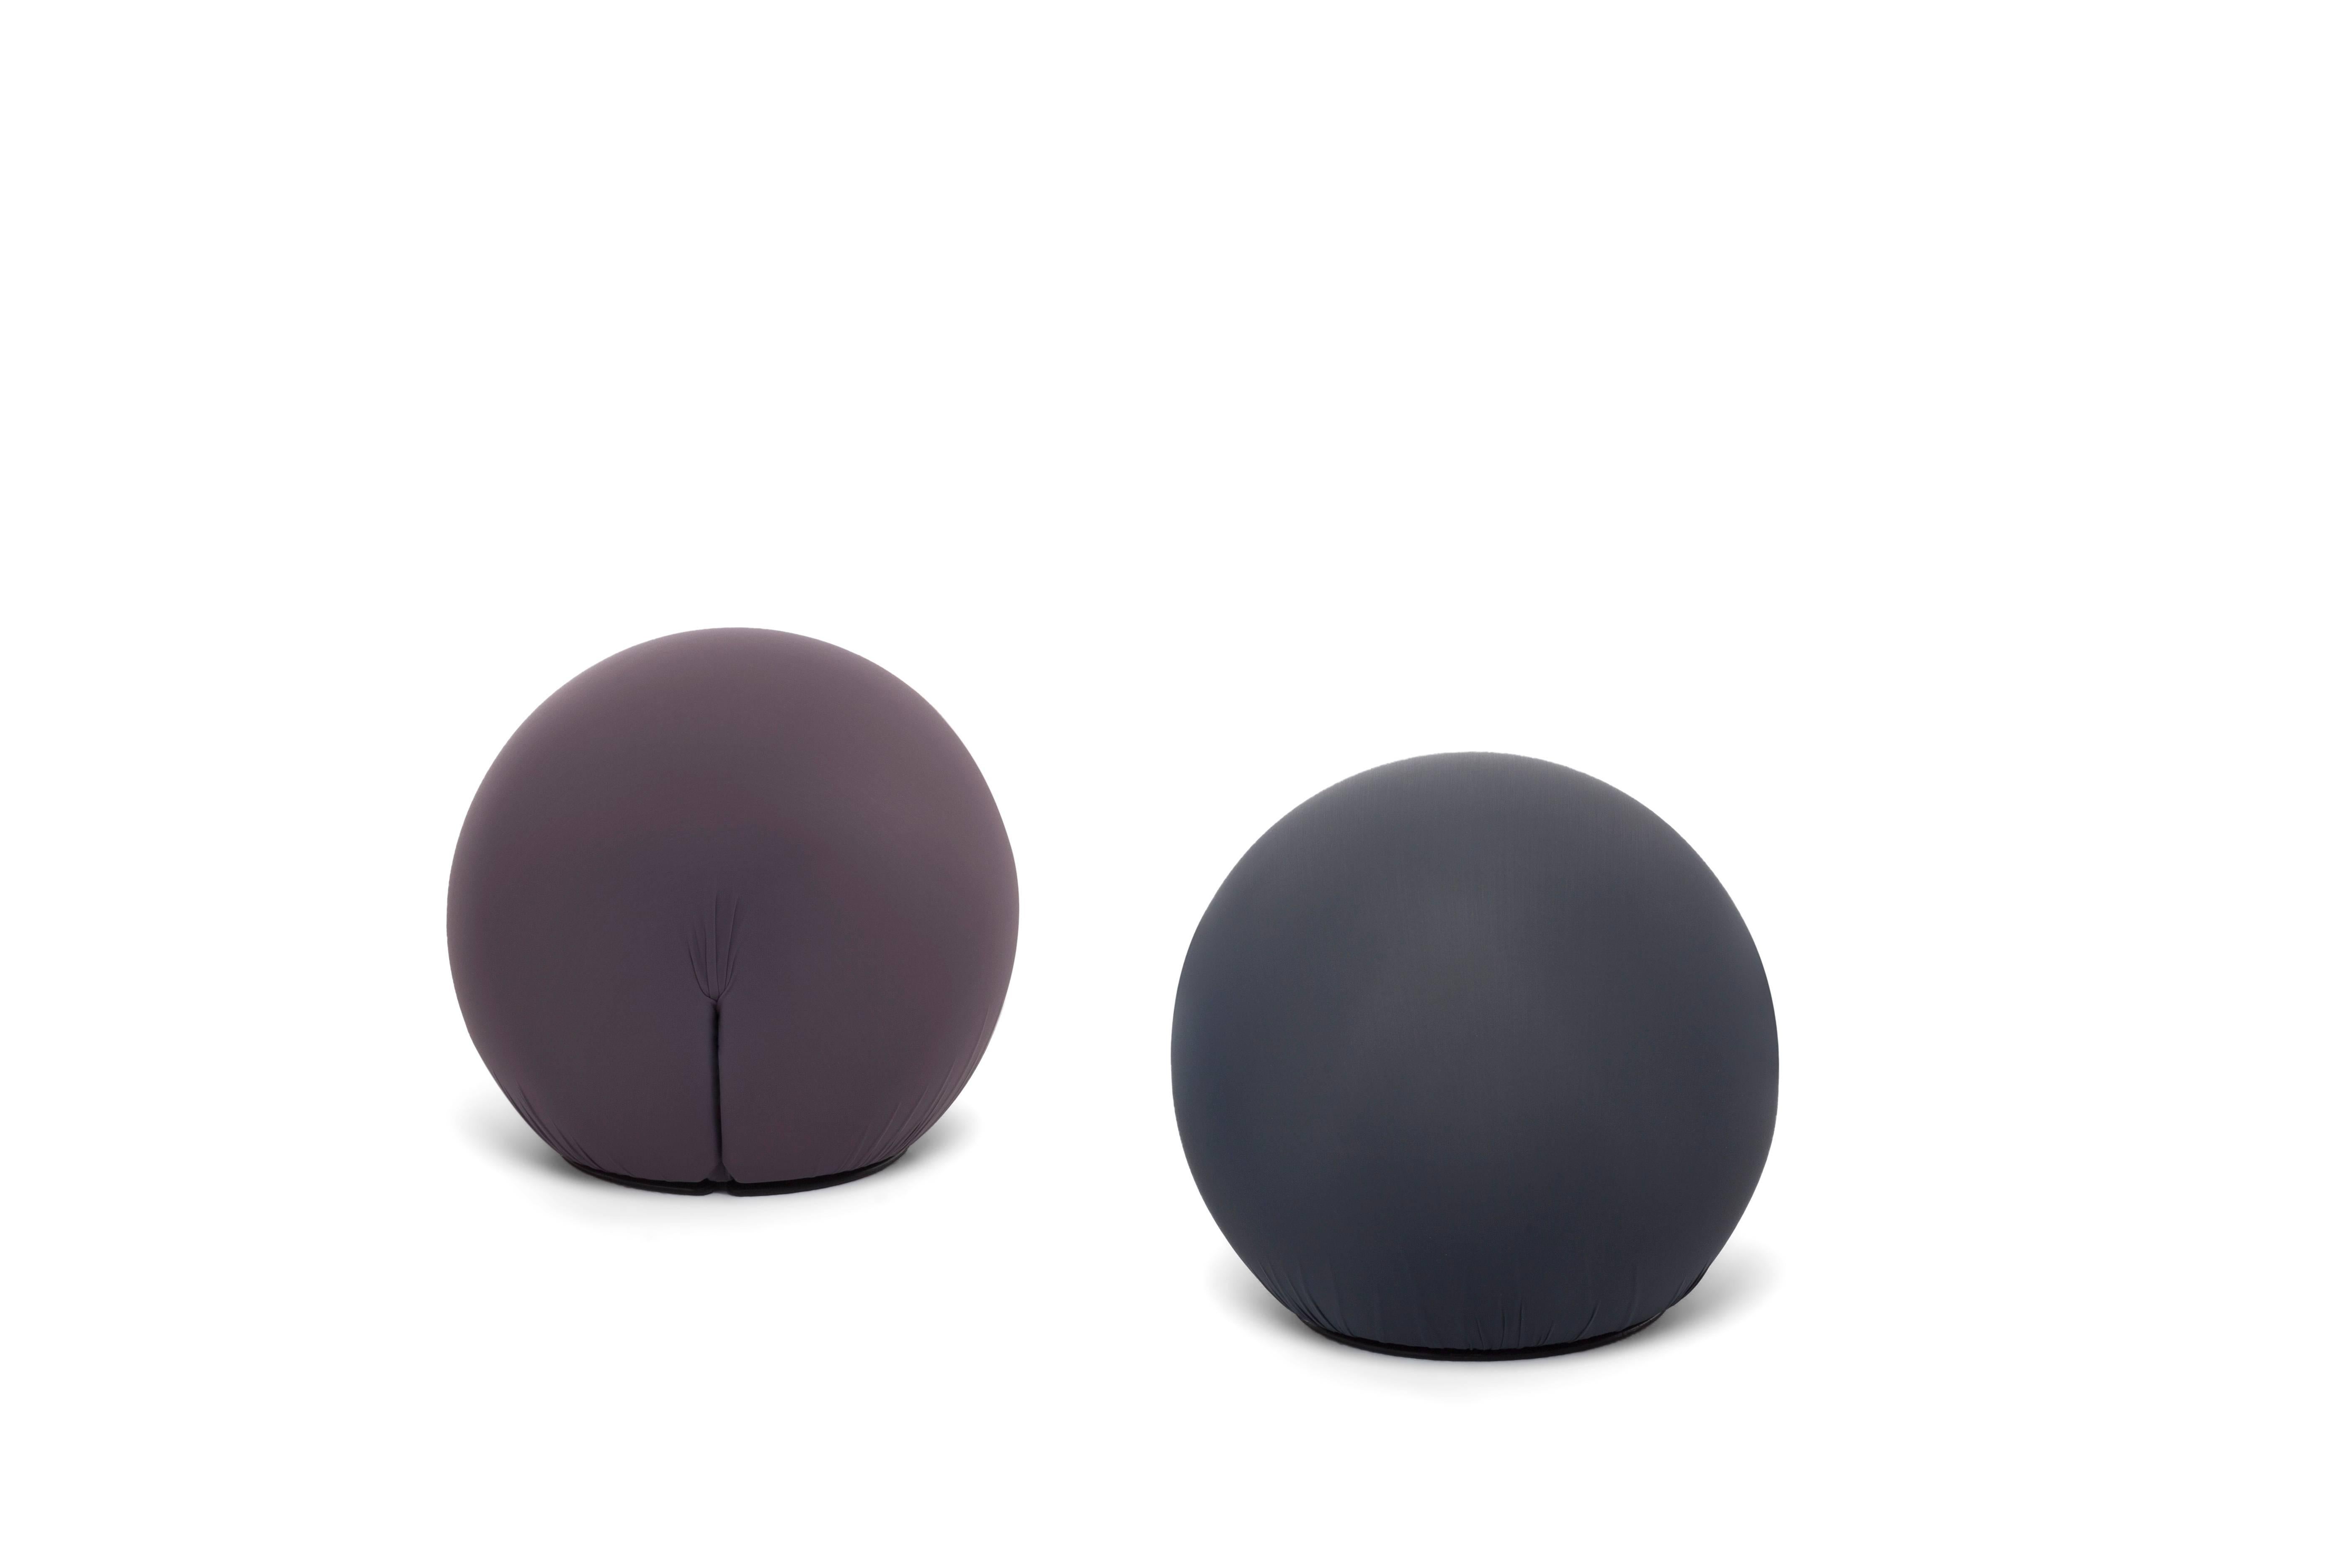 Flexible seat and footrest in spherical shape made of polyurethane with internal rigid structure. Polyurethane cold-processed without CDC. Two lateral slits keep the removable cover in bi-elastic fabric.

 